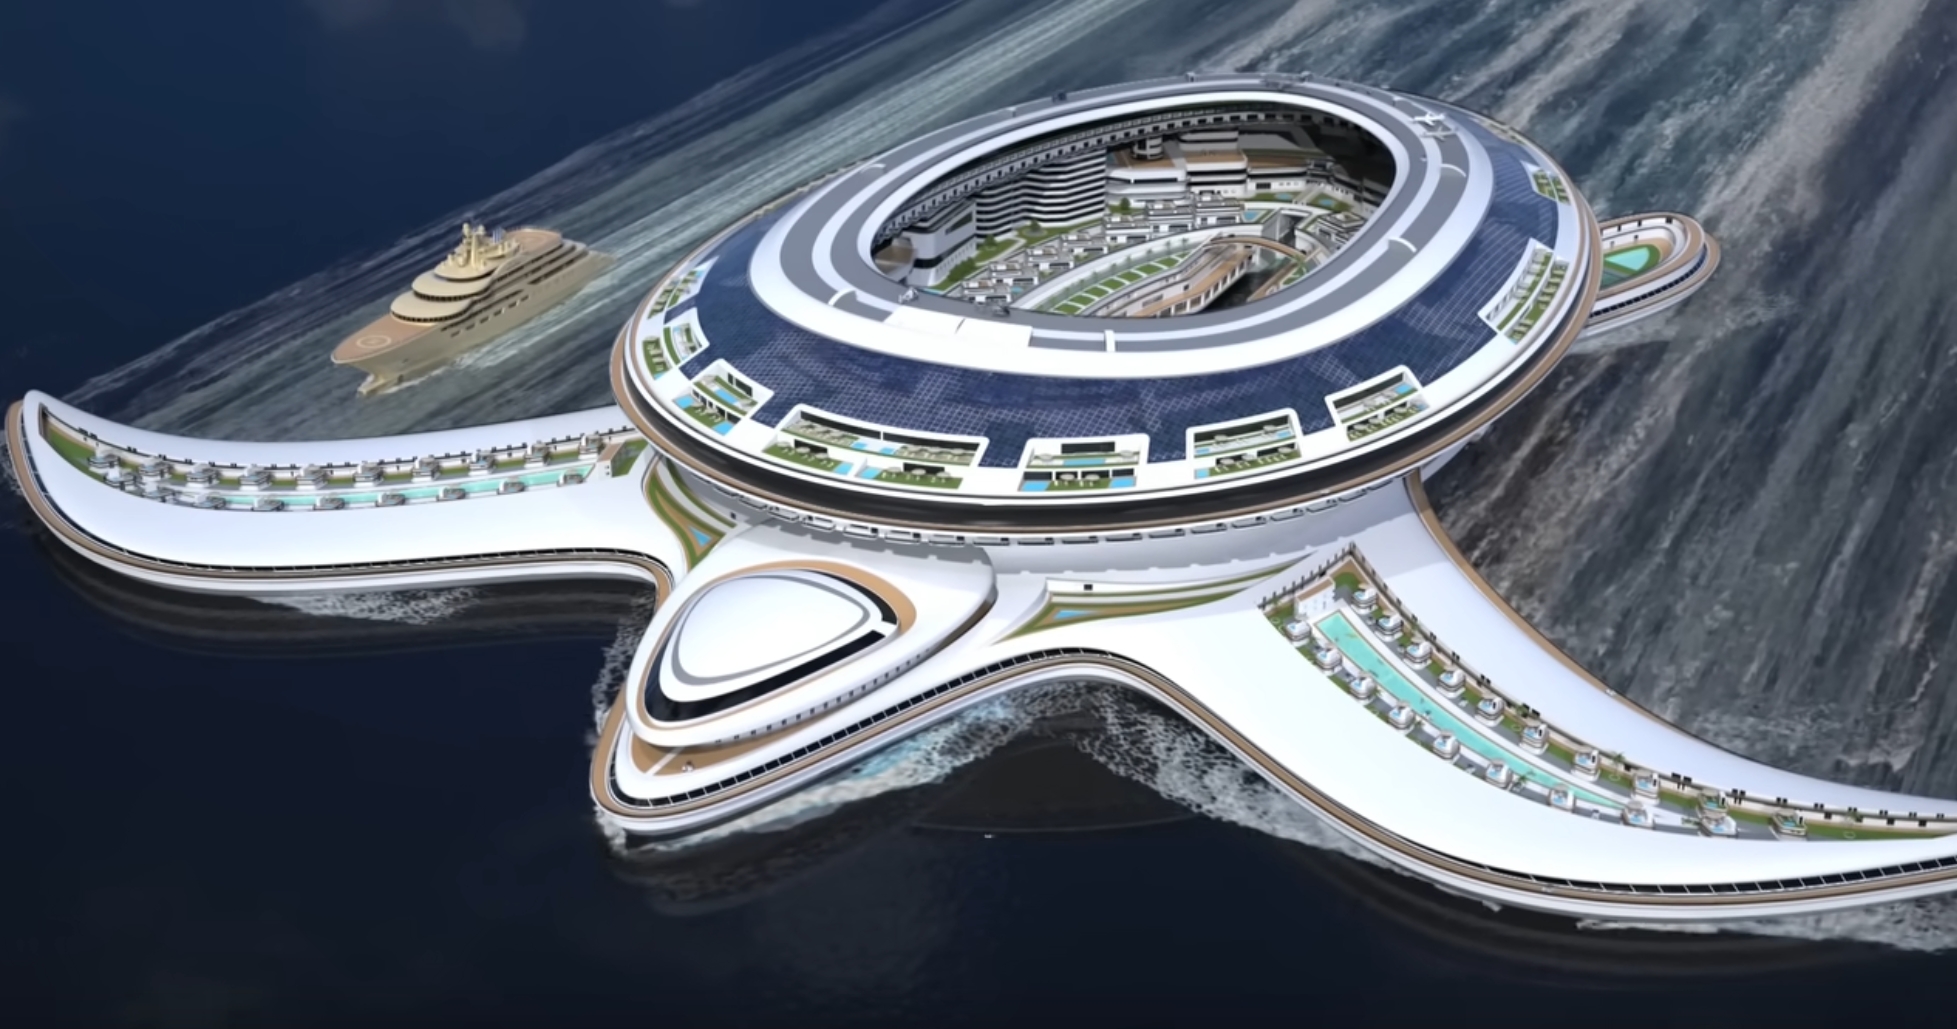 Pangeos Terayacht Giant Floating City (1)